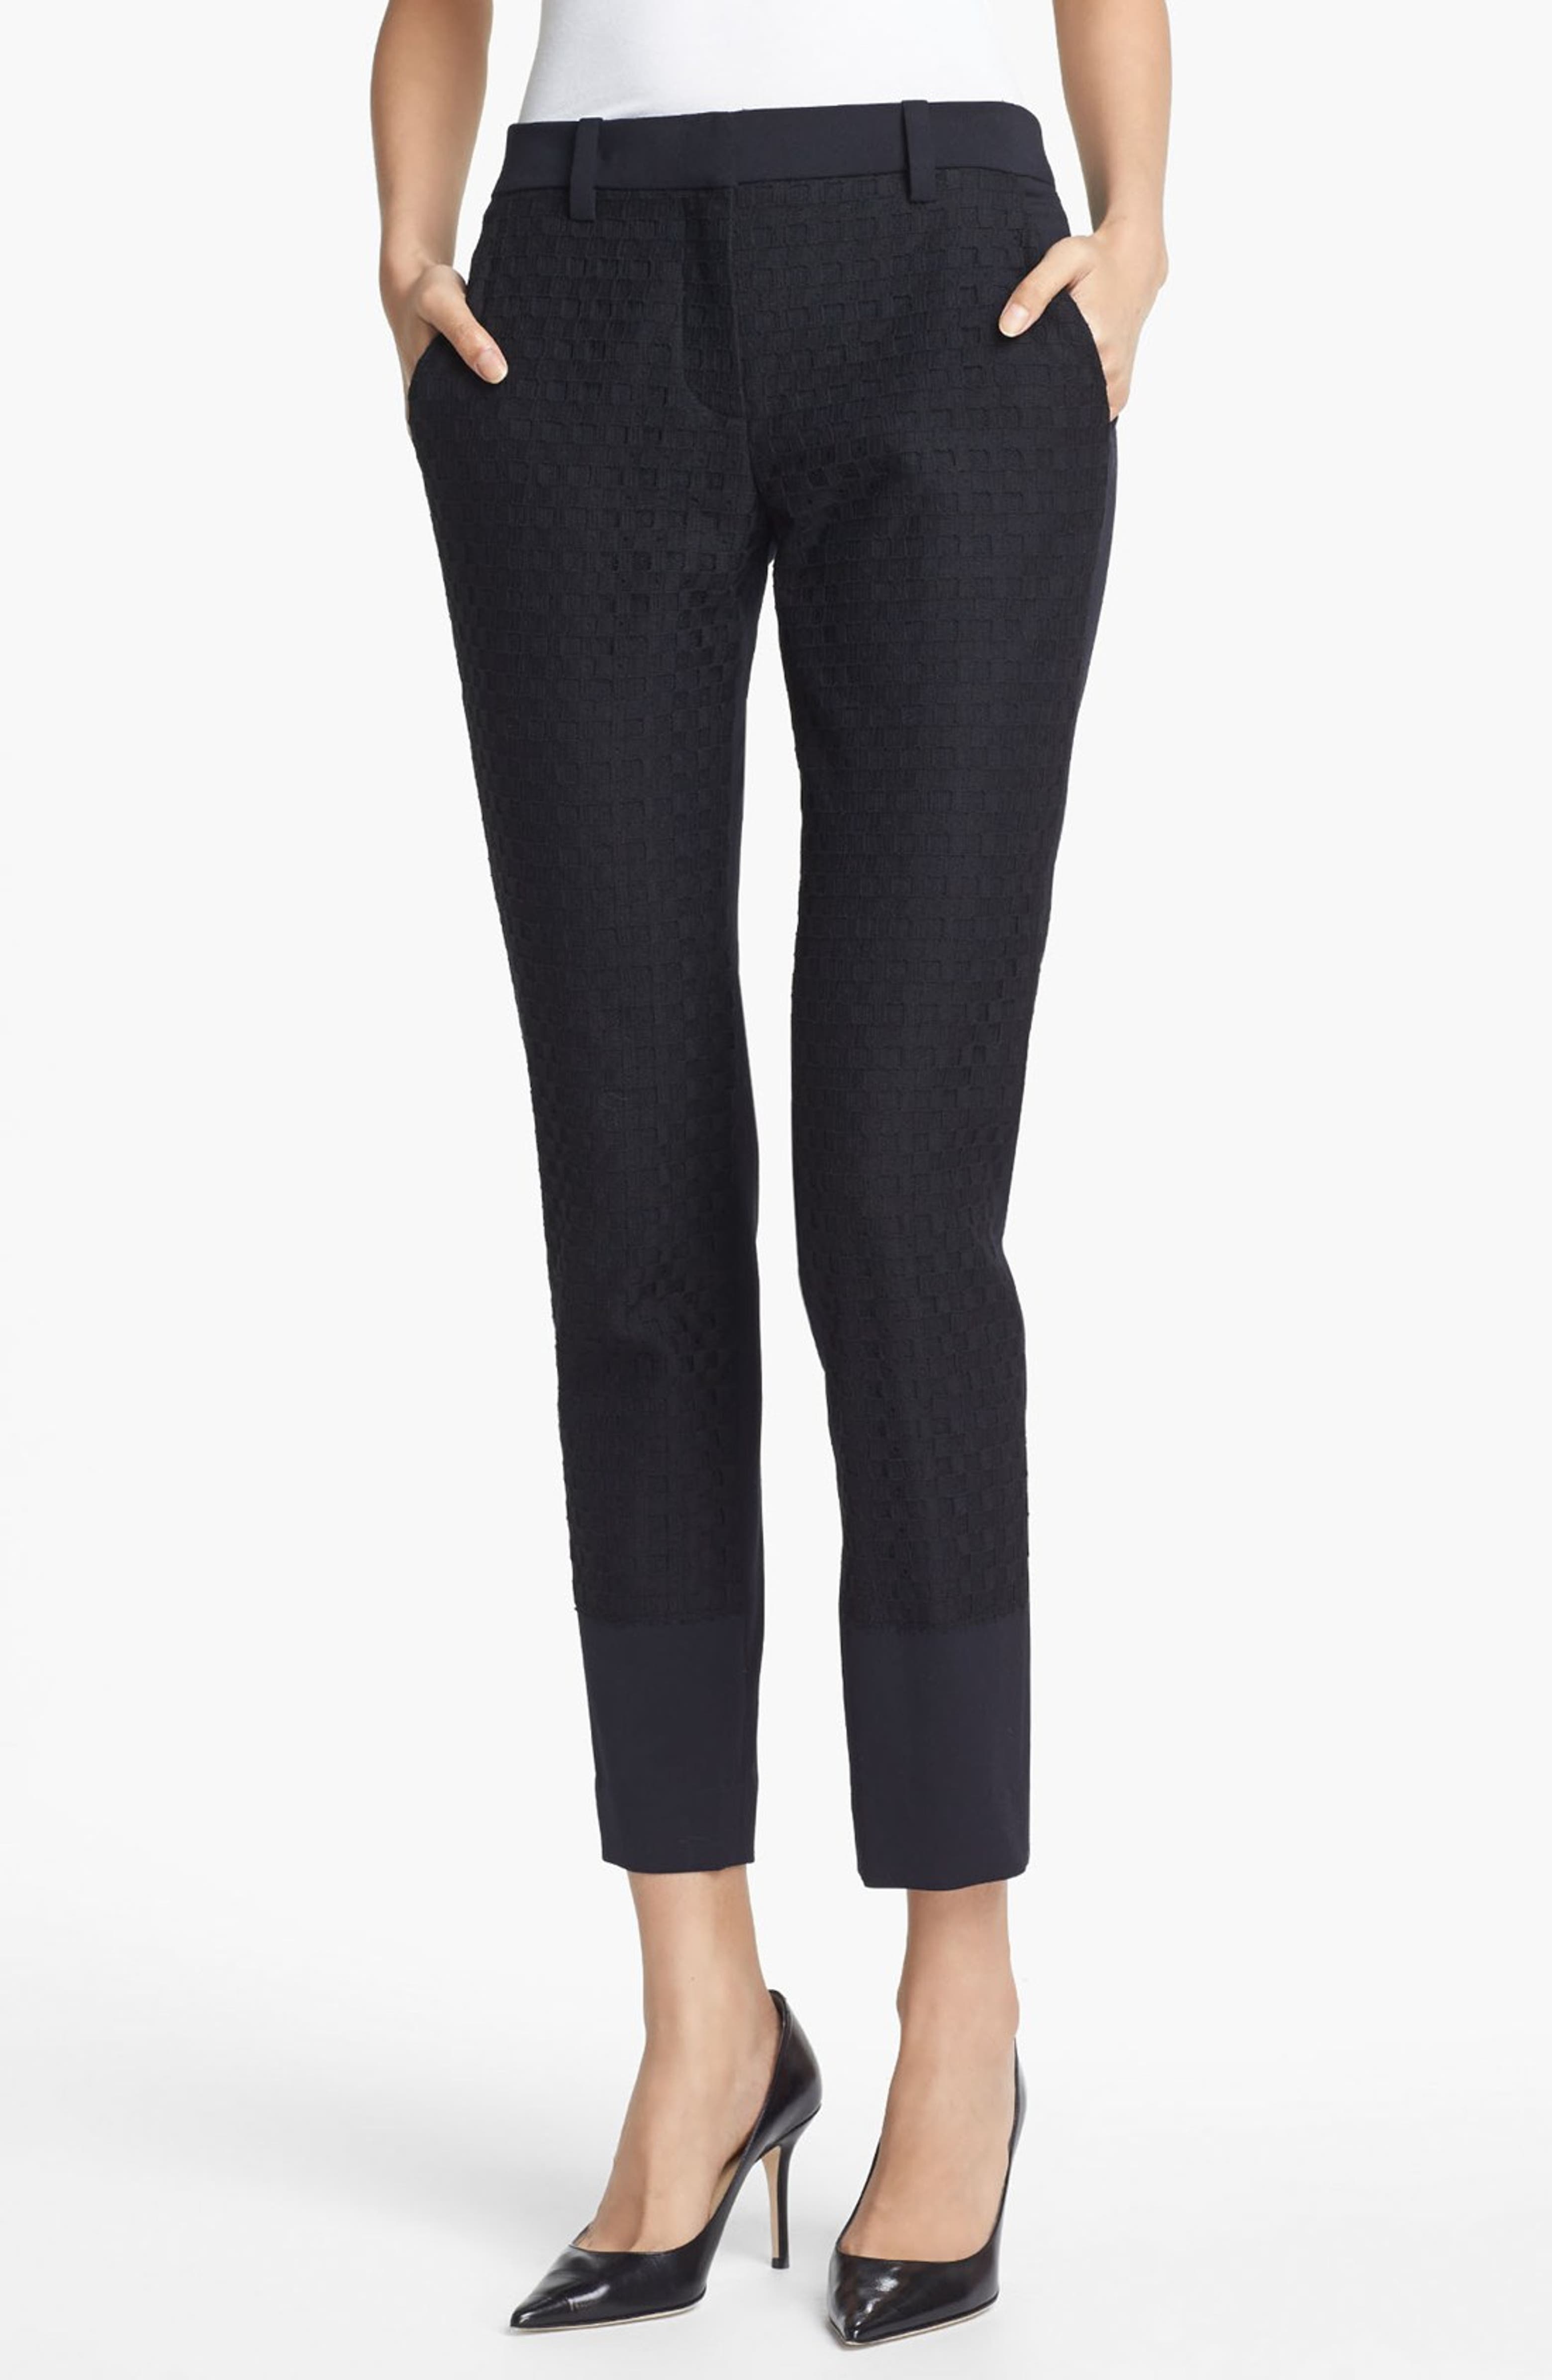 A.L.C. 'Taylor' Checkerboard Lace Pants | Nordstrom